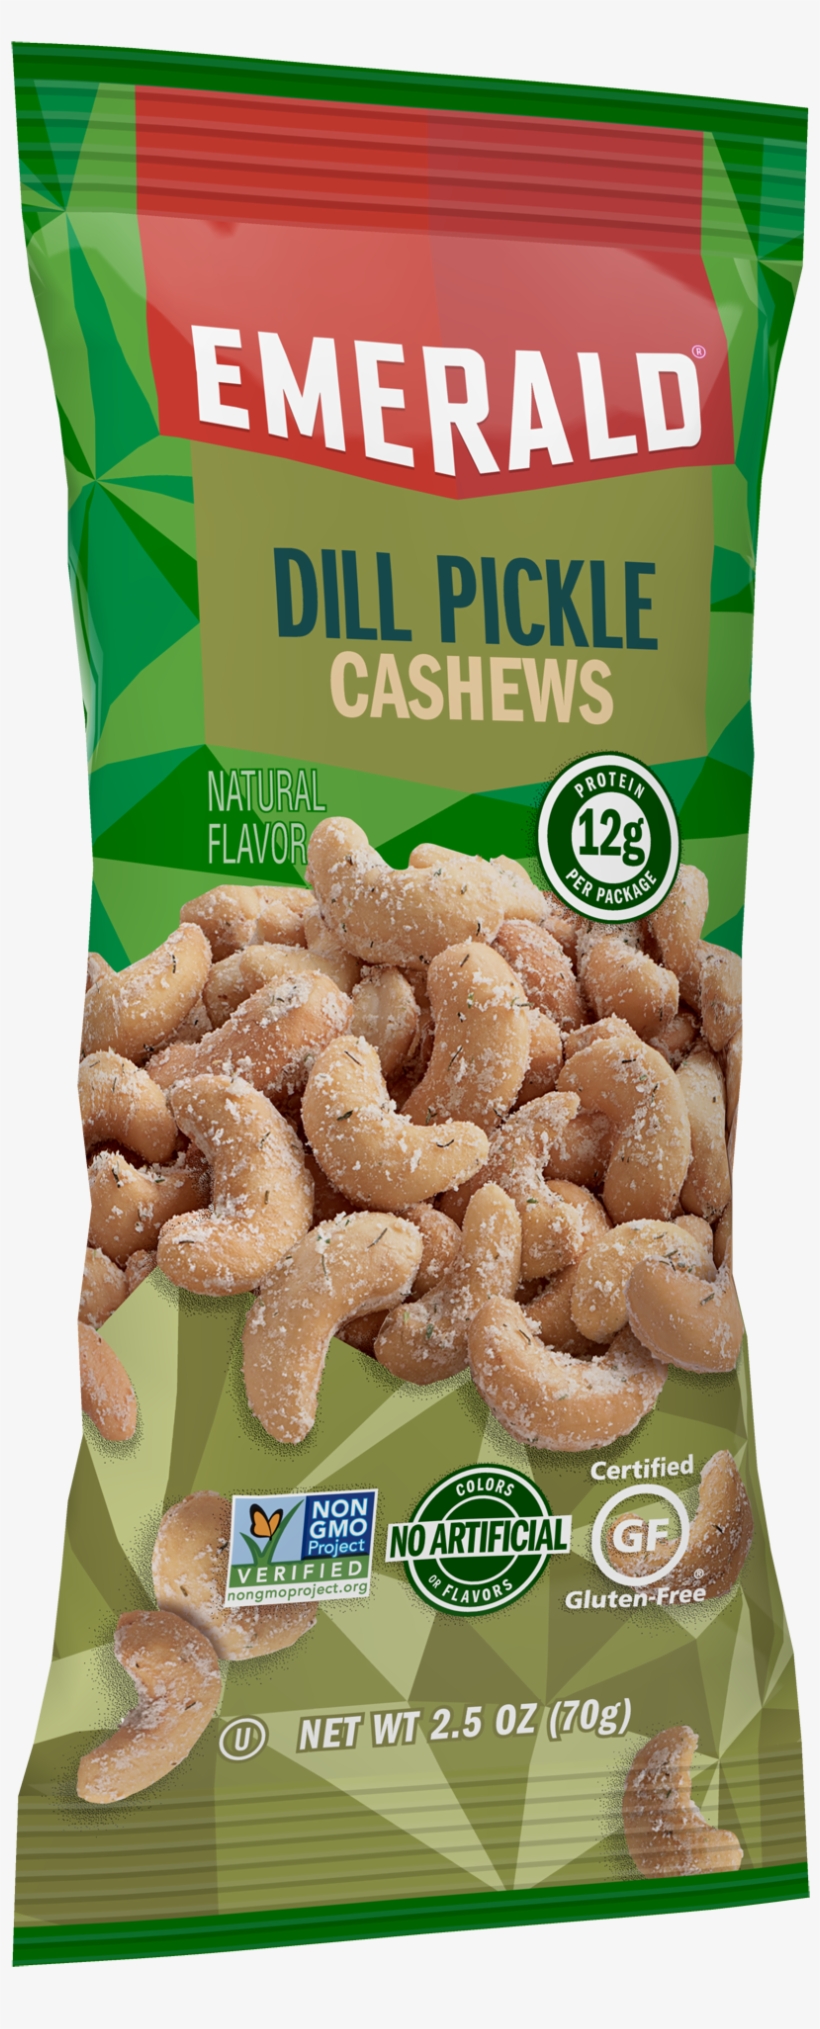 Emerald Nuts, Dill Pickle Cashews, - Emerald Dill Pickle Cashews Tube 1.25 Oz, transparent png #9765366